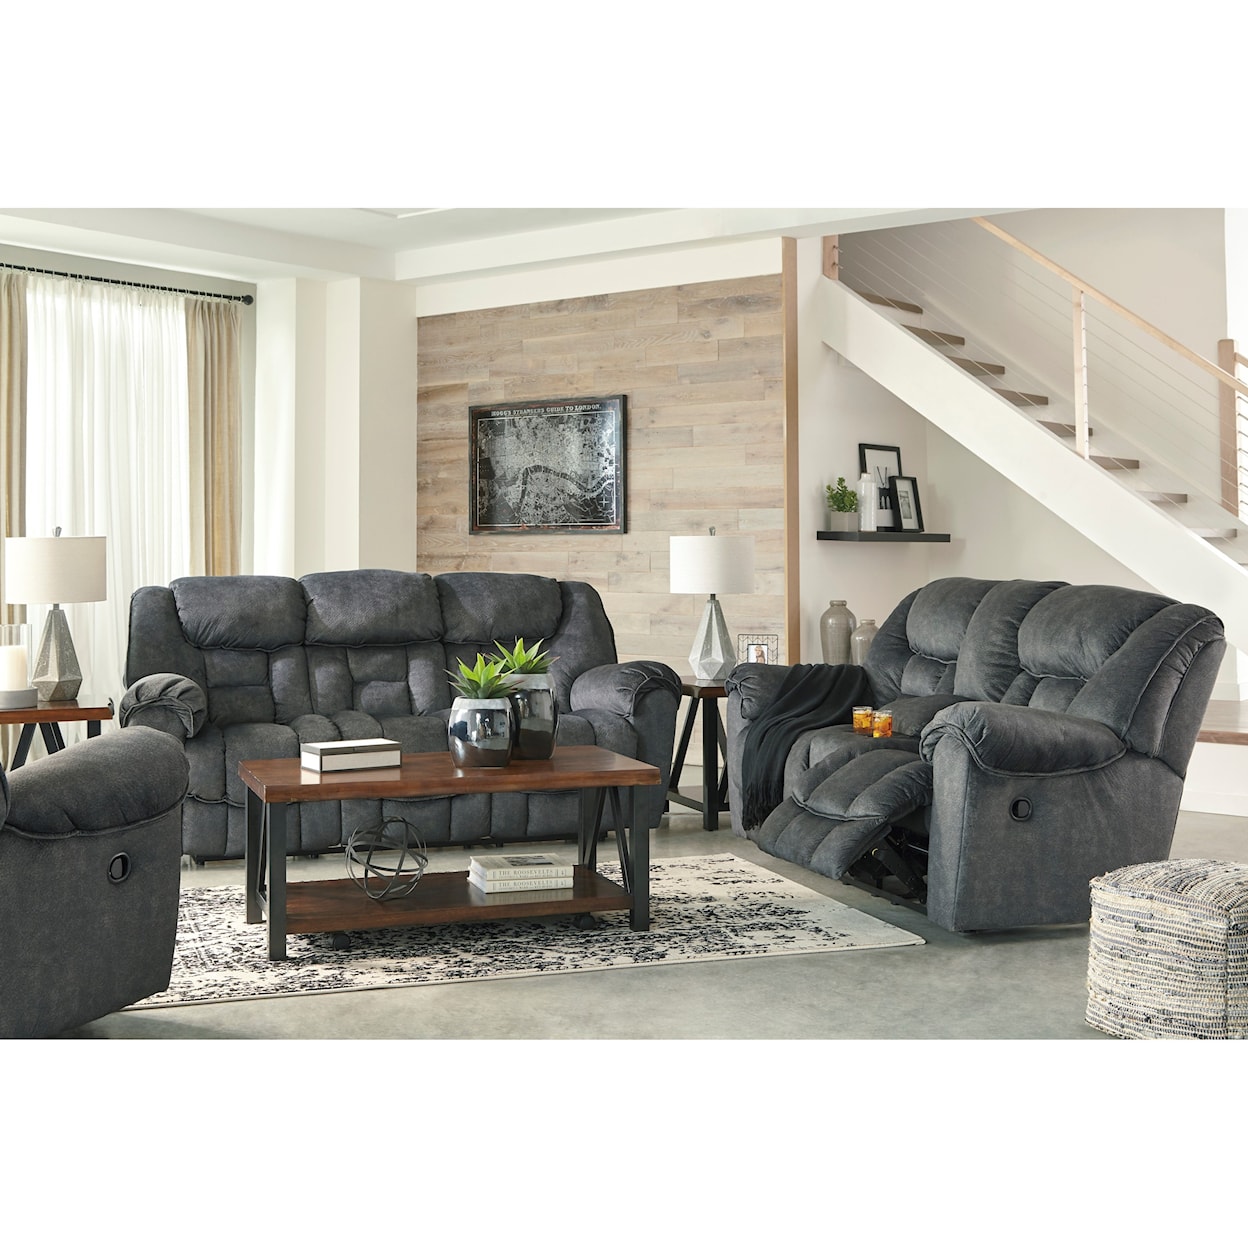 Signature Design by Ashley Capehorn Double Reclining Loveseat w/ Console